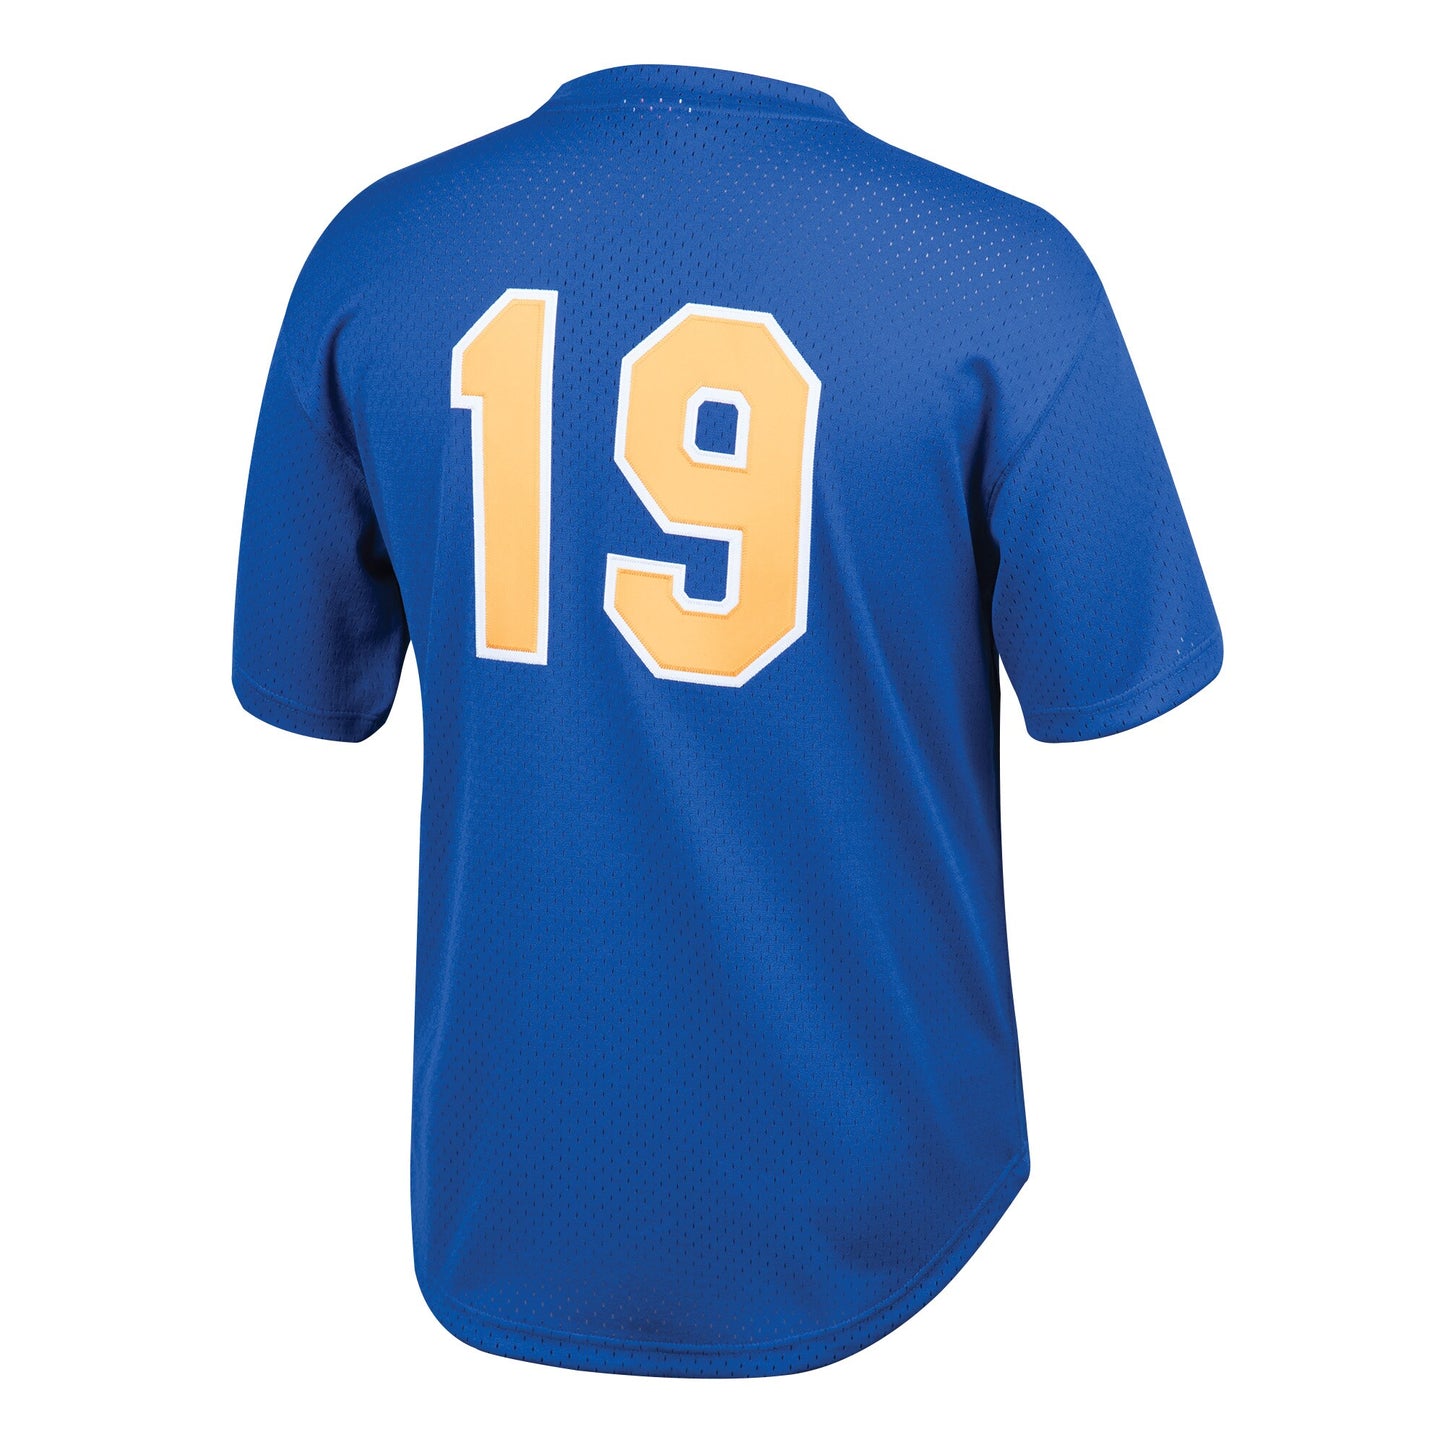 Youth Milwaukee Brewers Robin Yount Mitchell & Ness Royal Cooperstown Collection Mesh Batting Practice Jersey